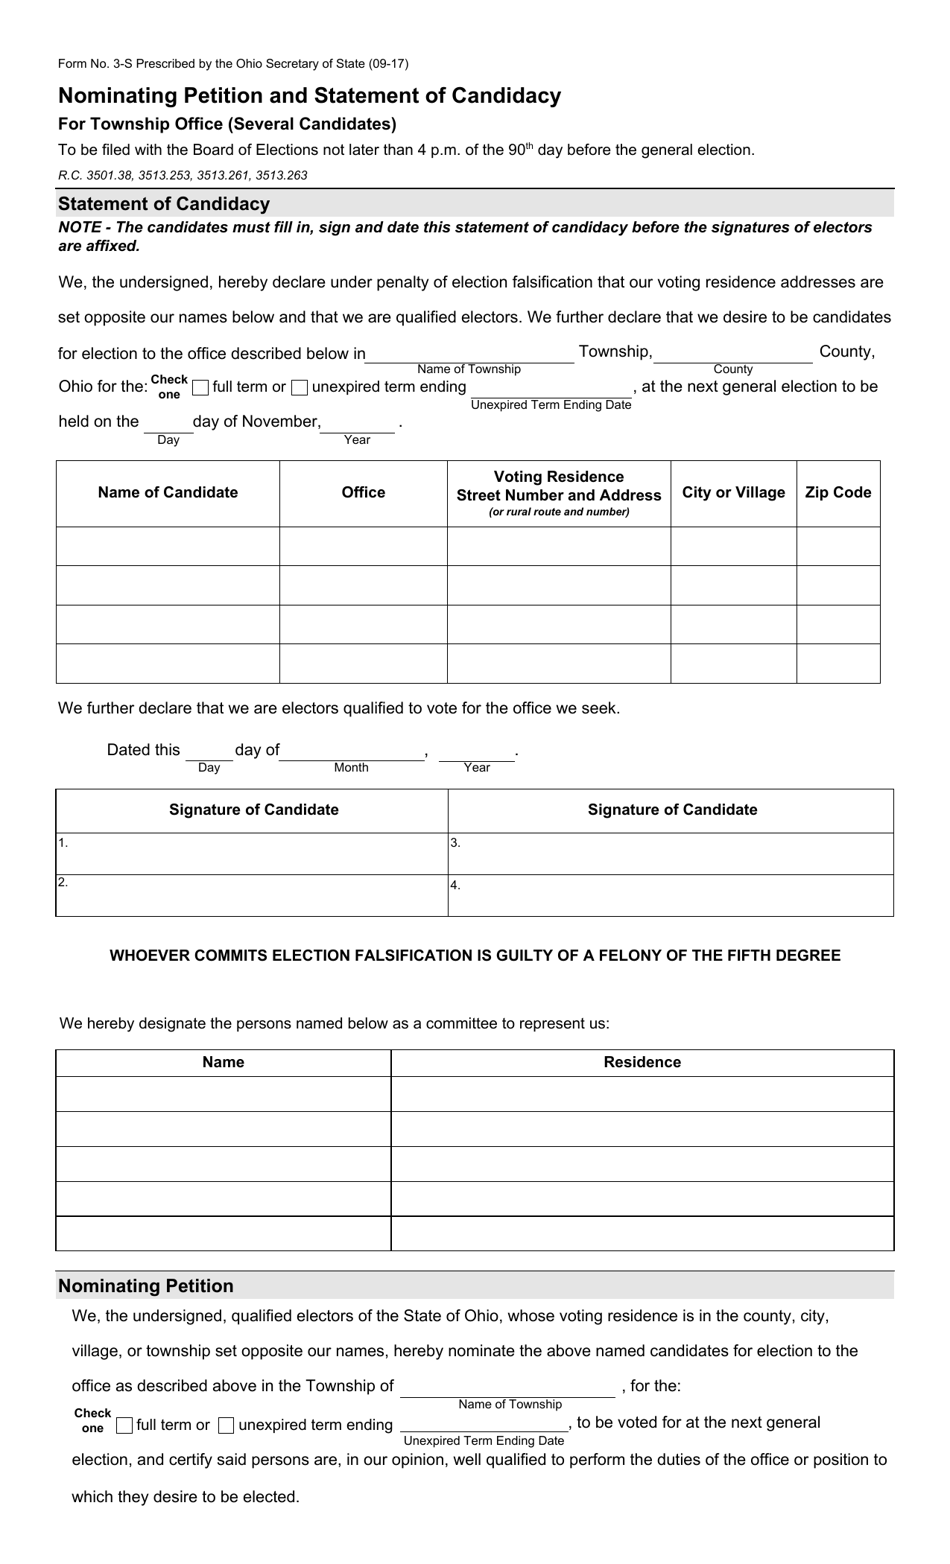 Form 3-S Nominating Petition and Statement of Candidacy for Township Office (Several Candidates) - Ohio, Page 1